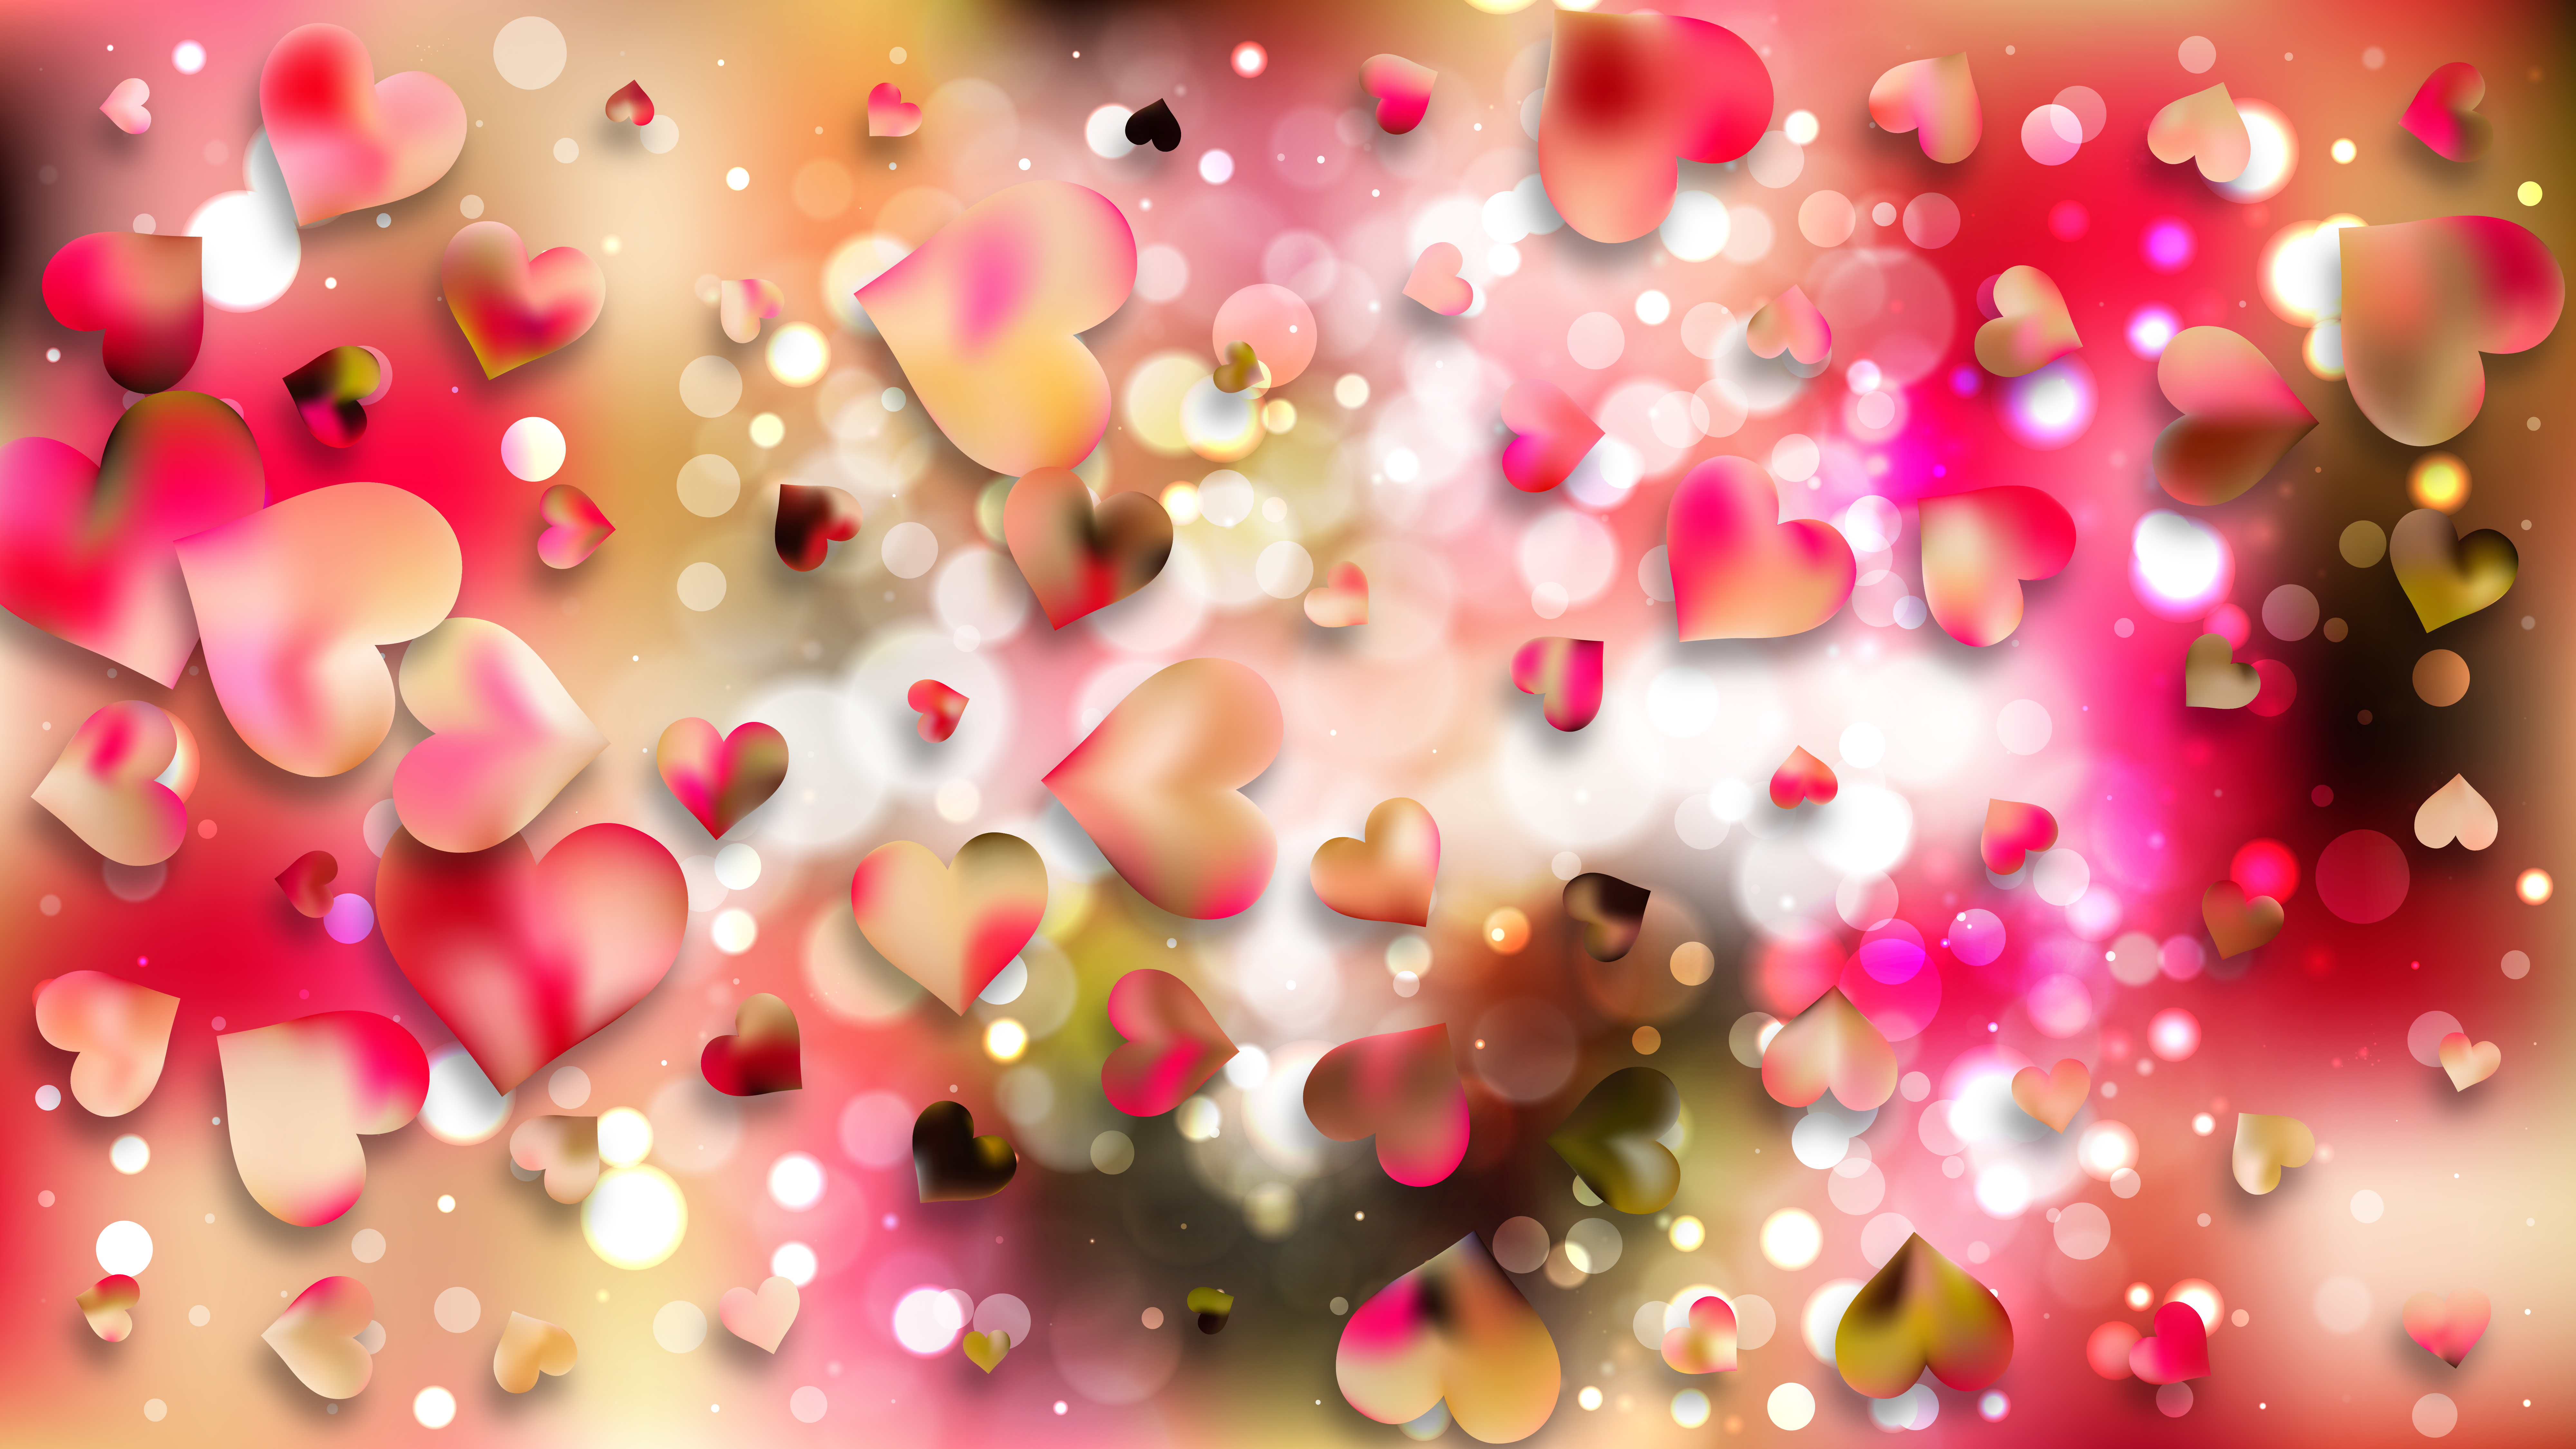 Free Pink and Yellow Love Background Illustration